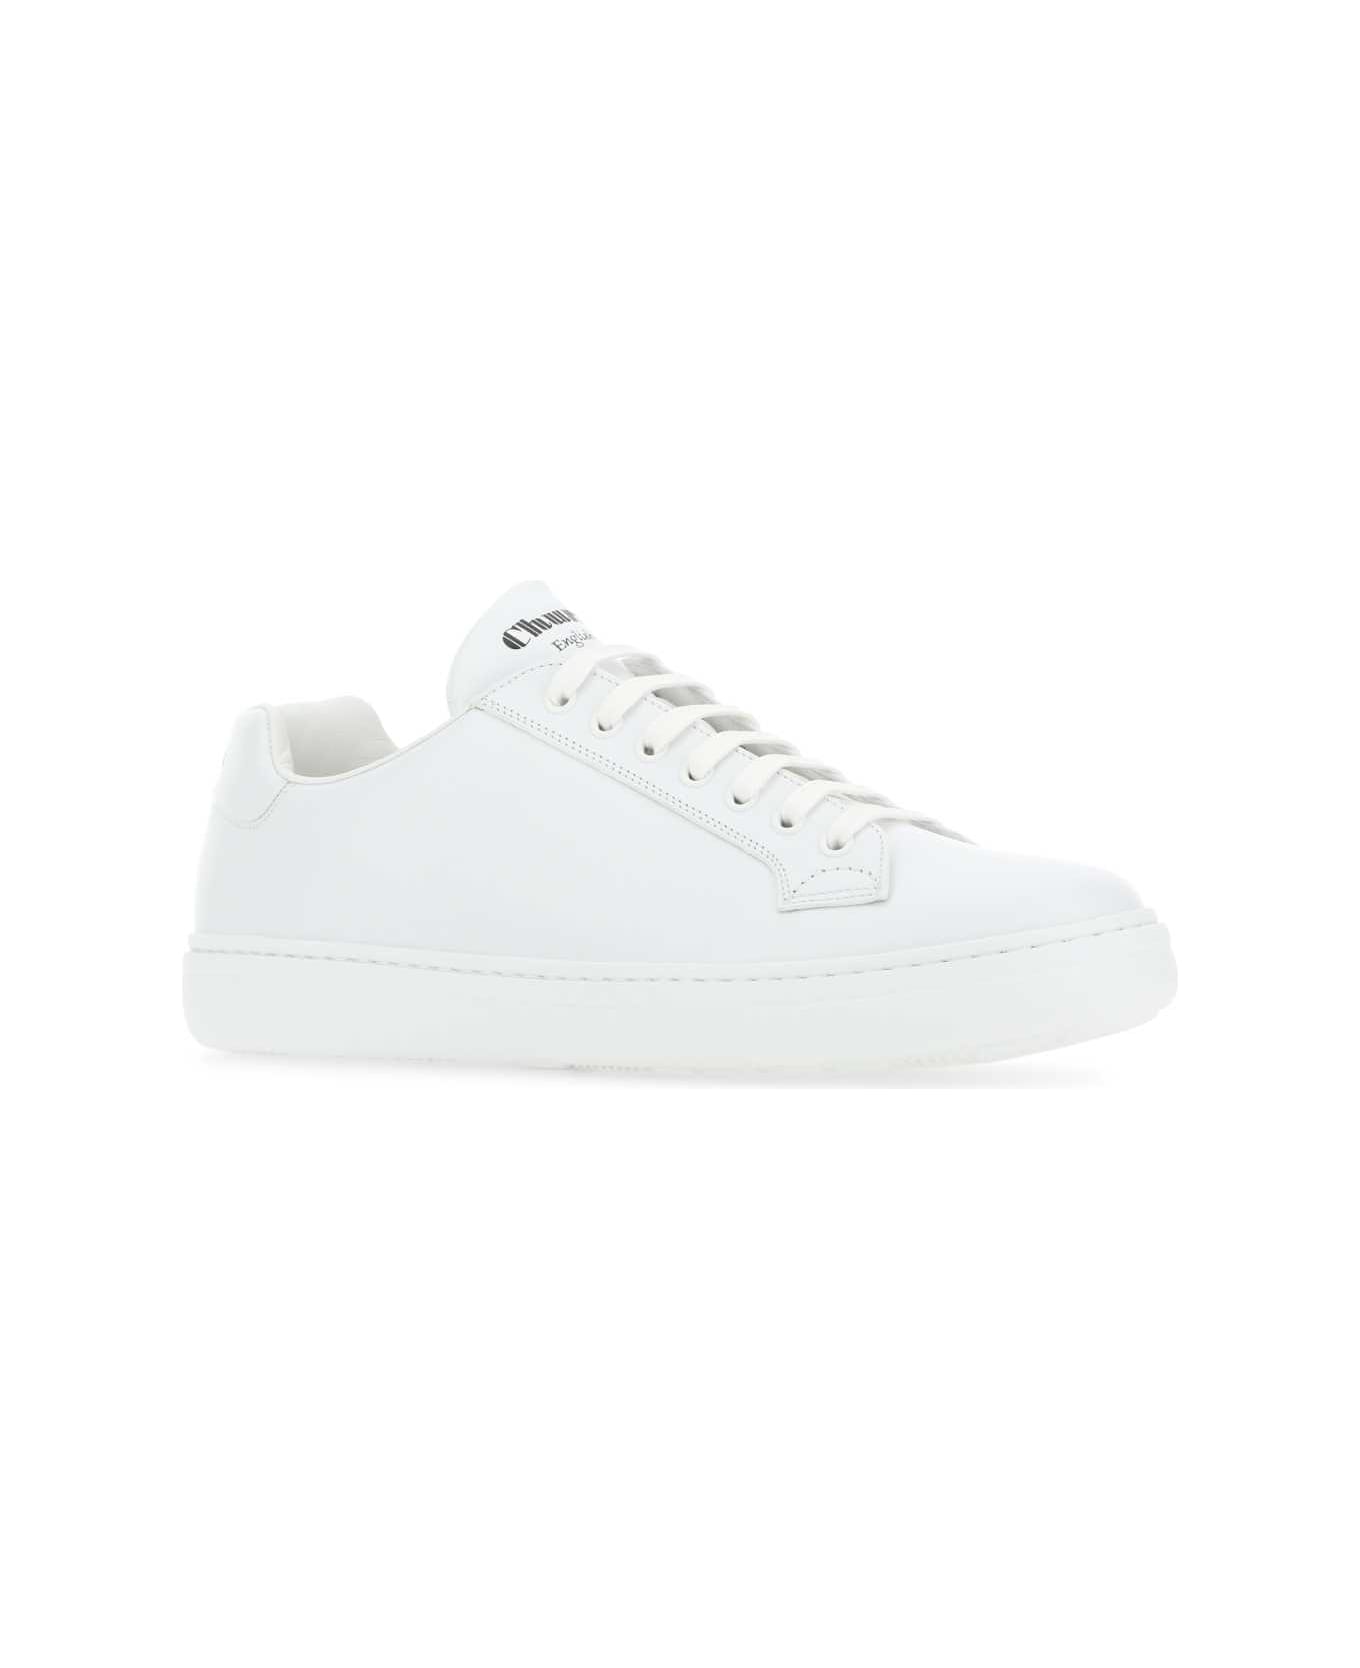 Church's White Leather Boland S Sneakers - F0ABK